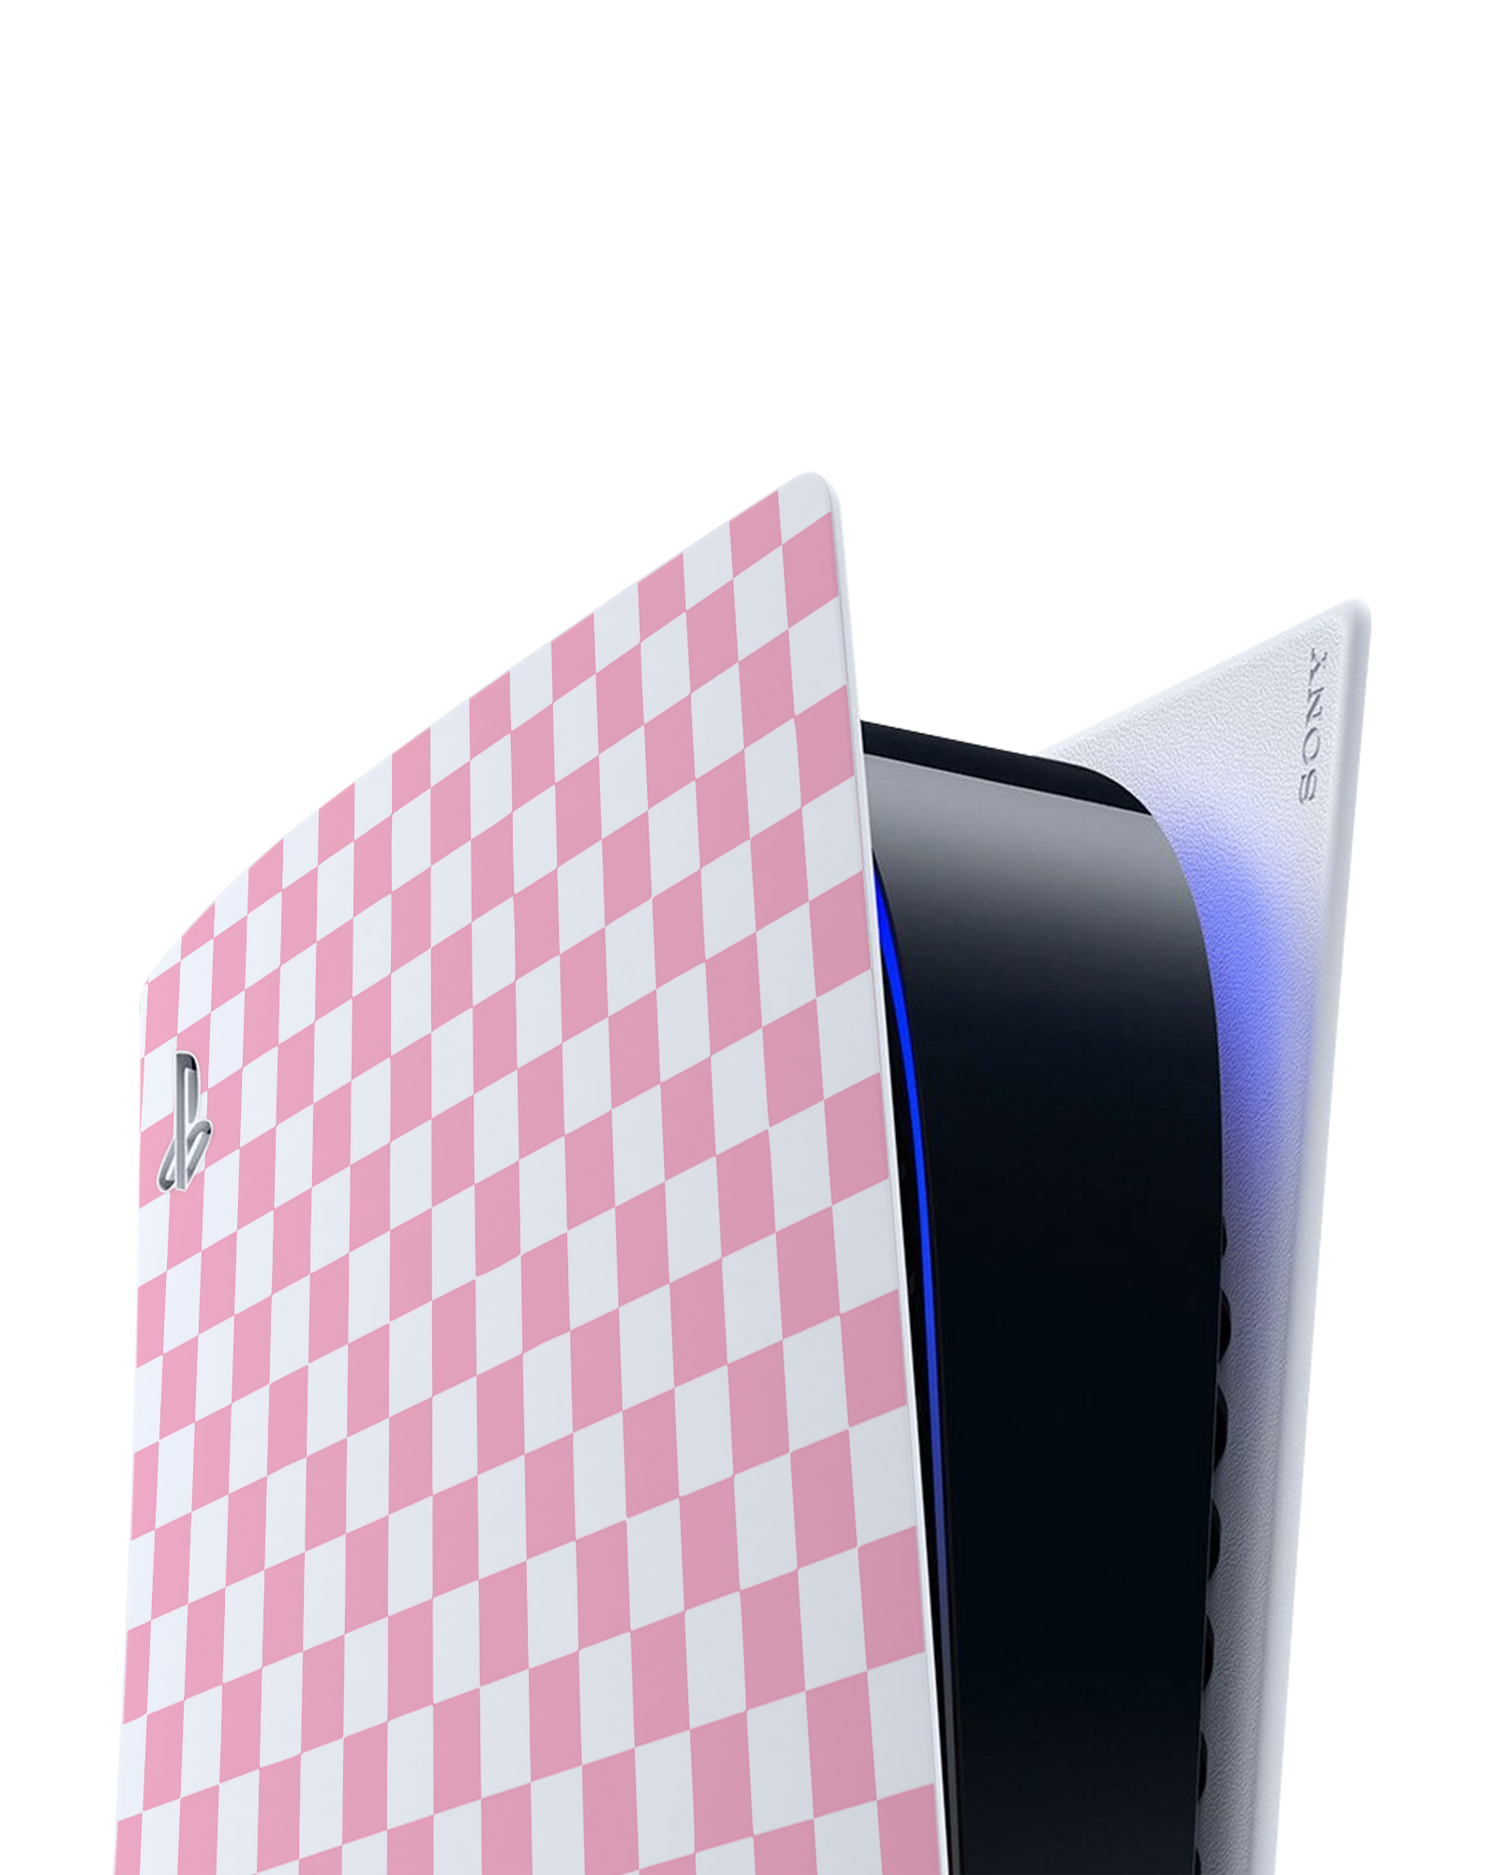 Pink Checkerboard Console Skin for Sony PlayStation 5 Digital Edition: Detail shot